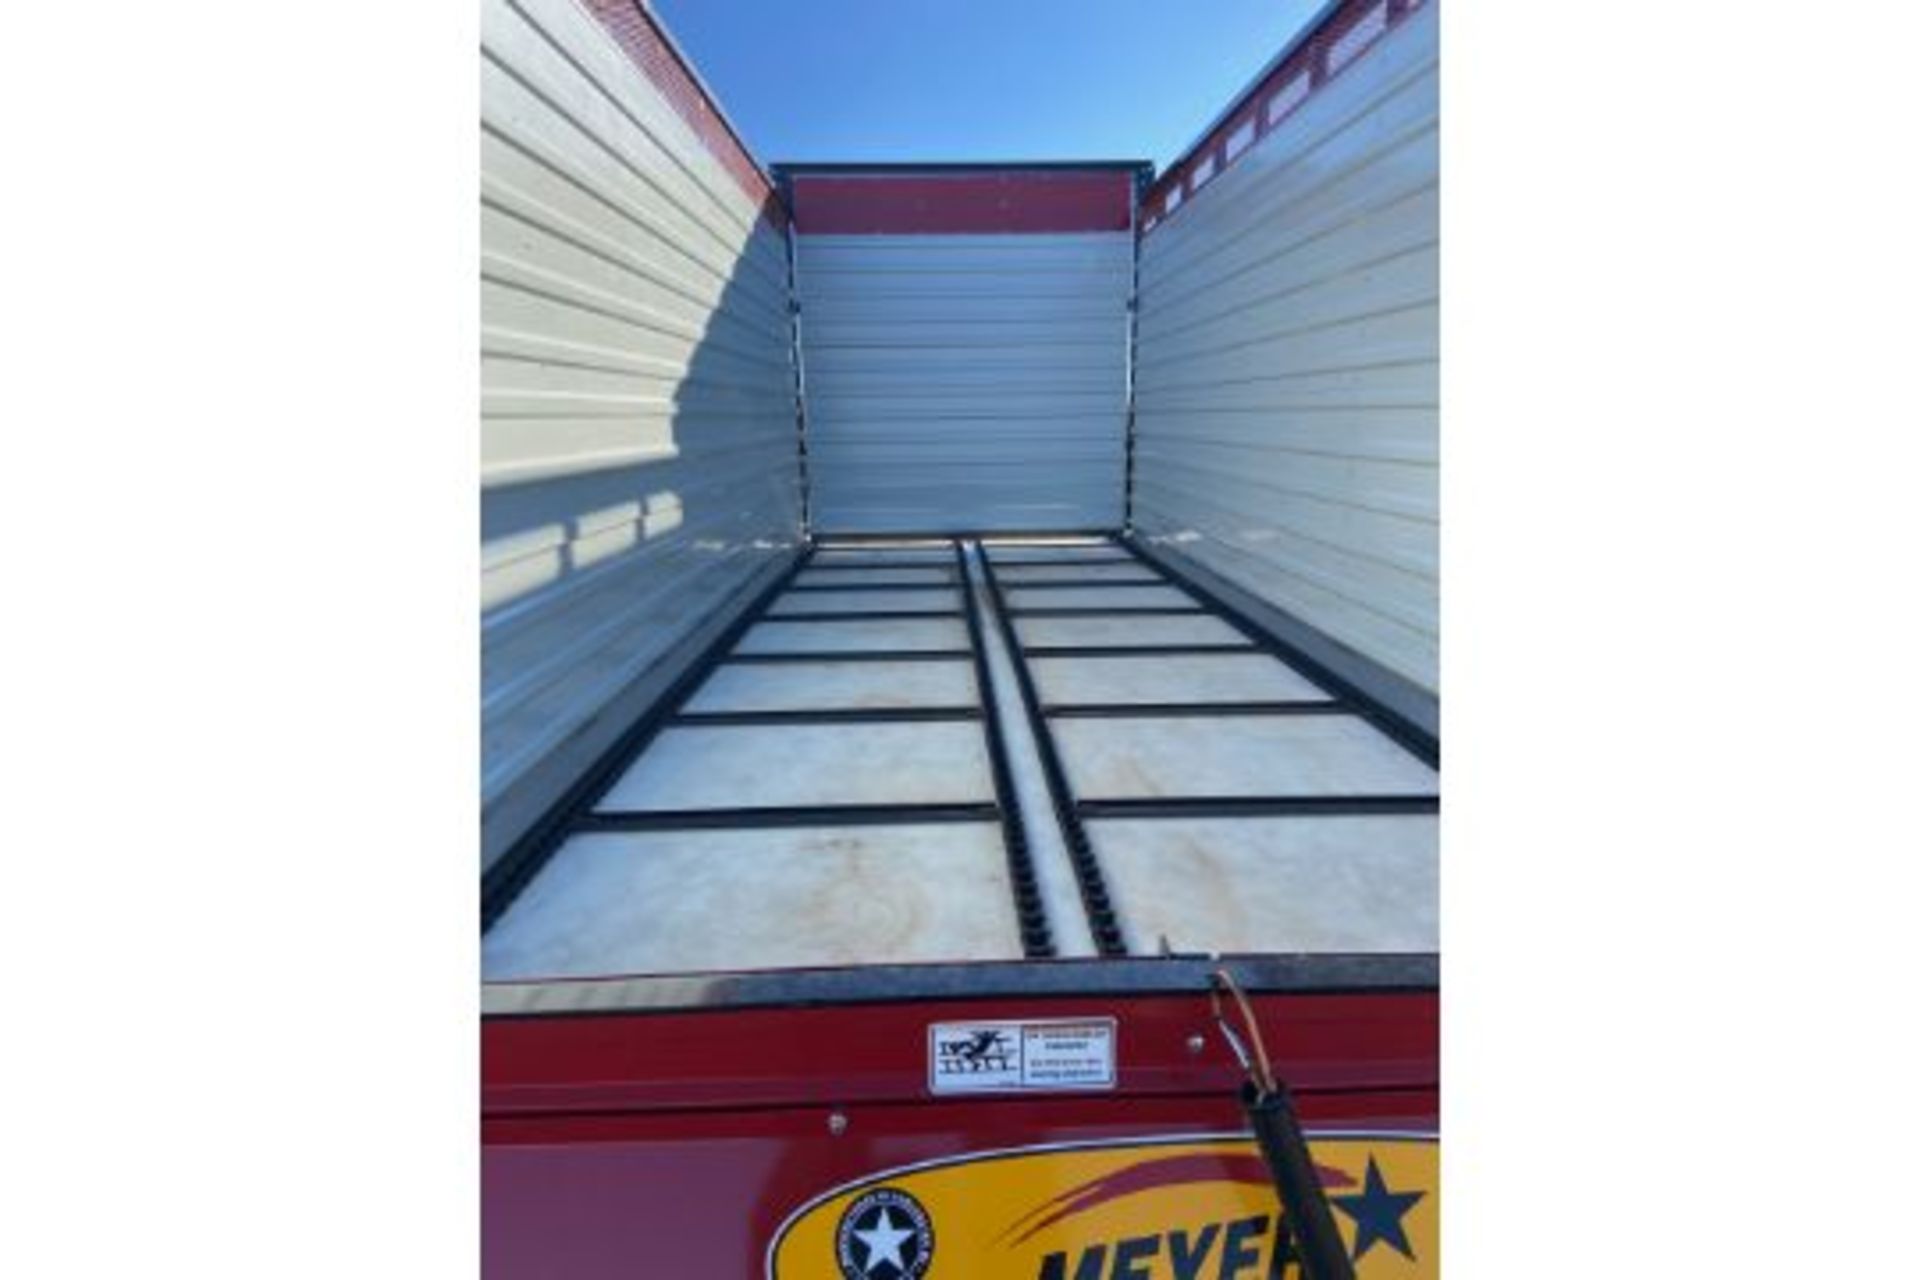 LIKE NEW Meyer Manufacturing Live Floor Rear Unload Forage Box, Serial# 1919DRX213, Rigging/ Loading - Image 3 of 6